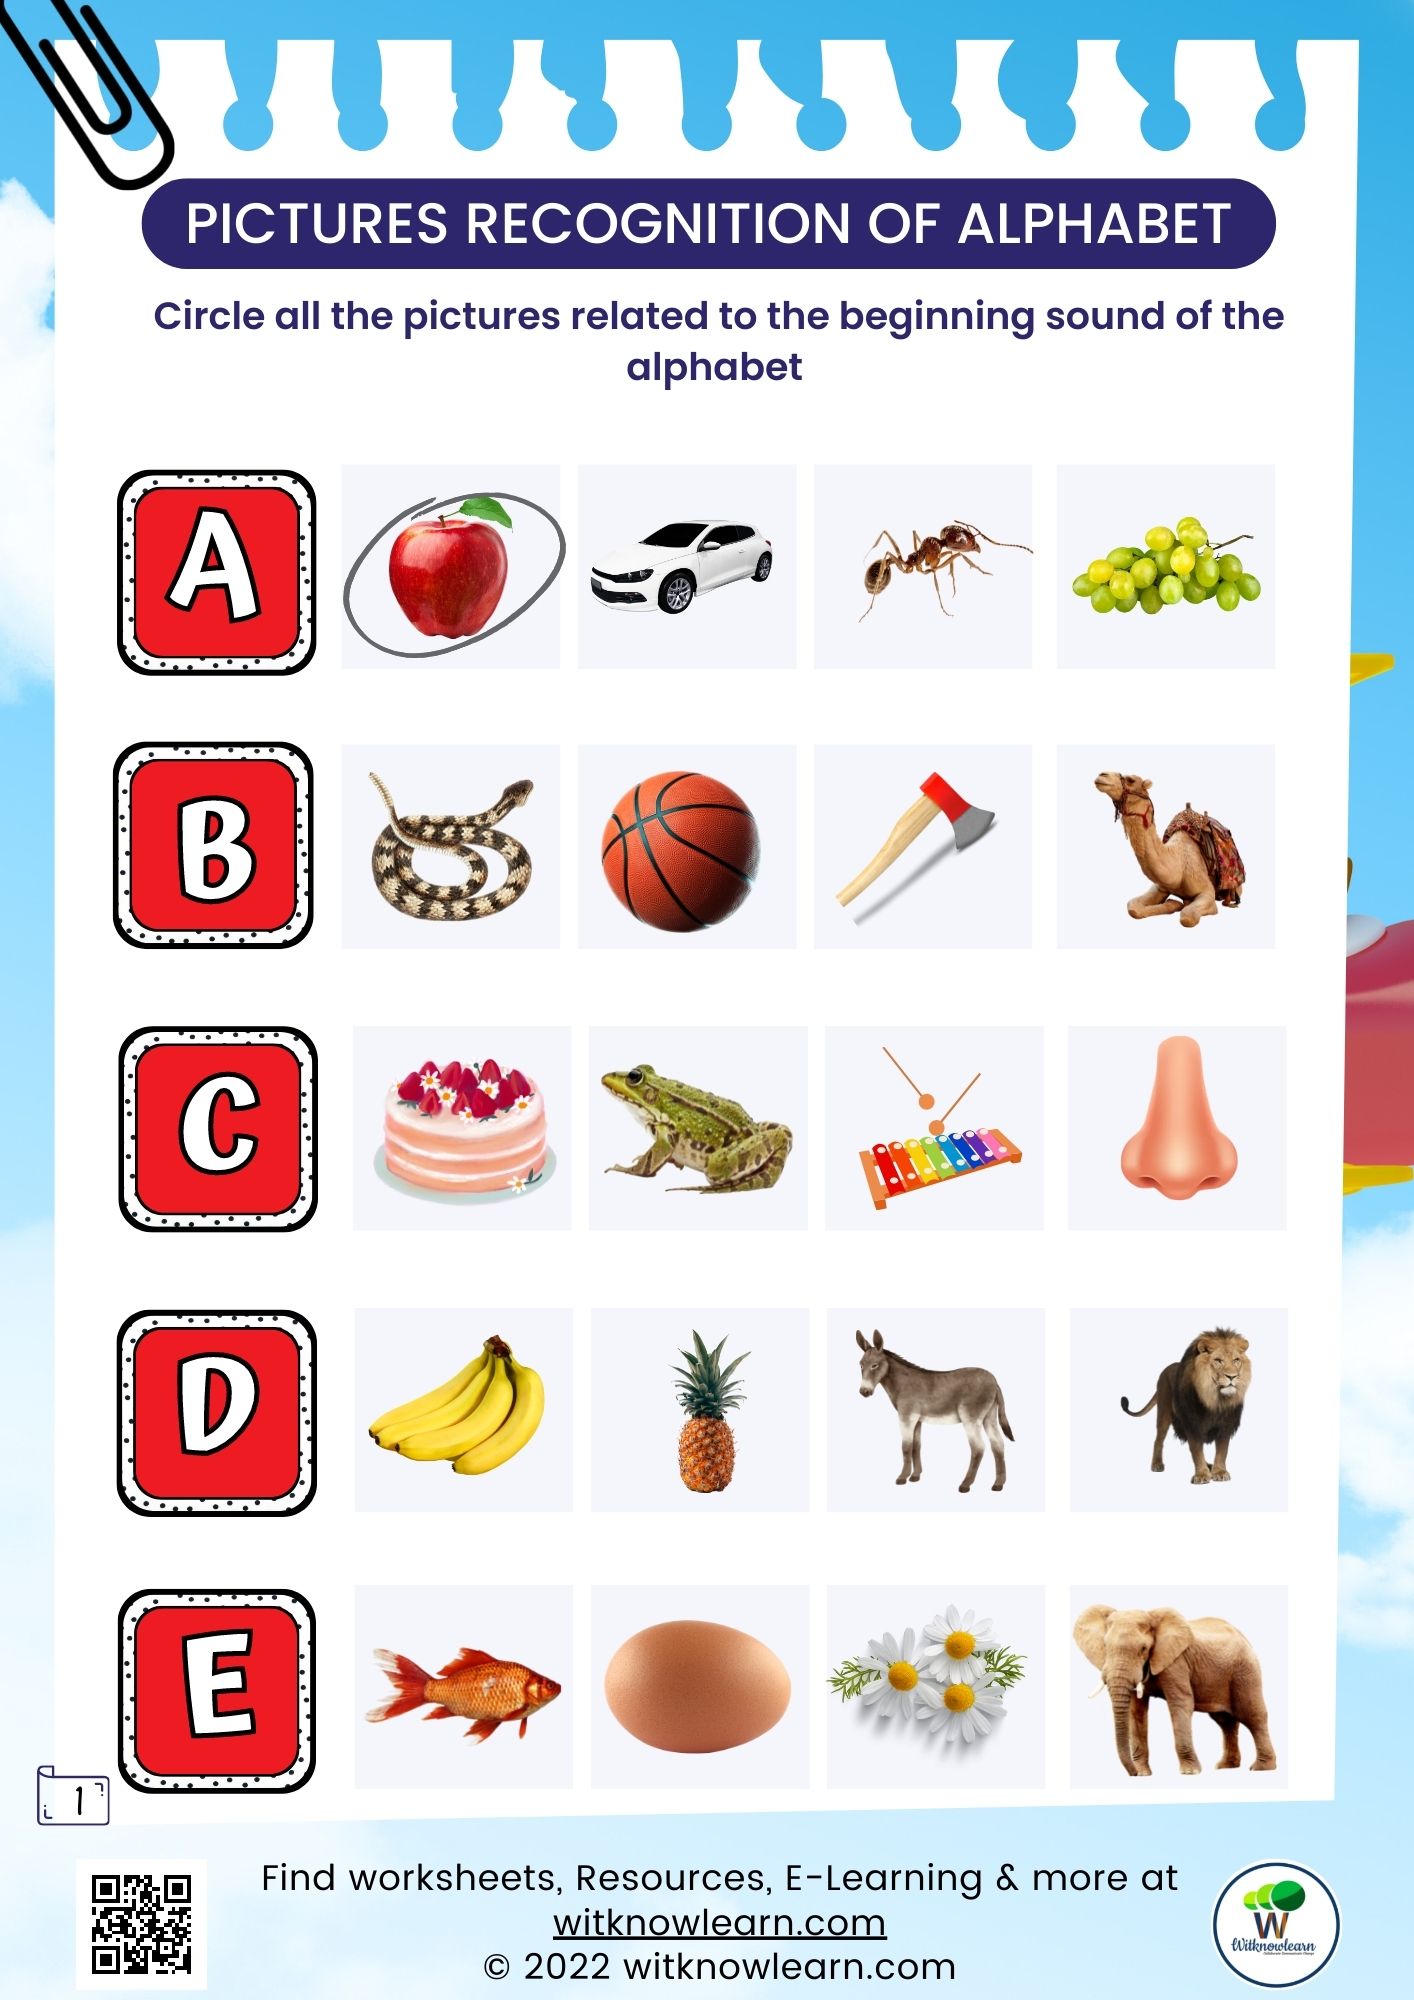 engage-your-child-with-these-nursery-matching-alphabets-with-pictures